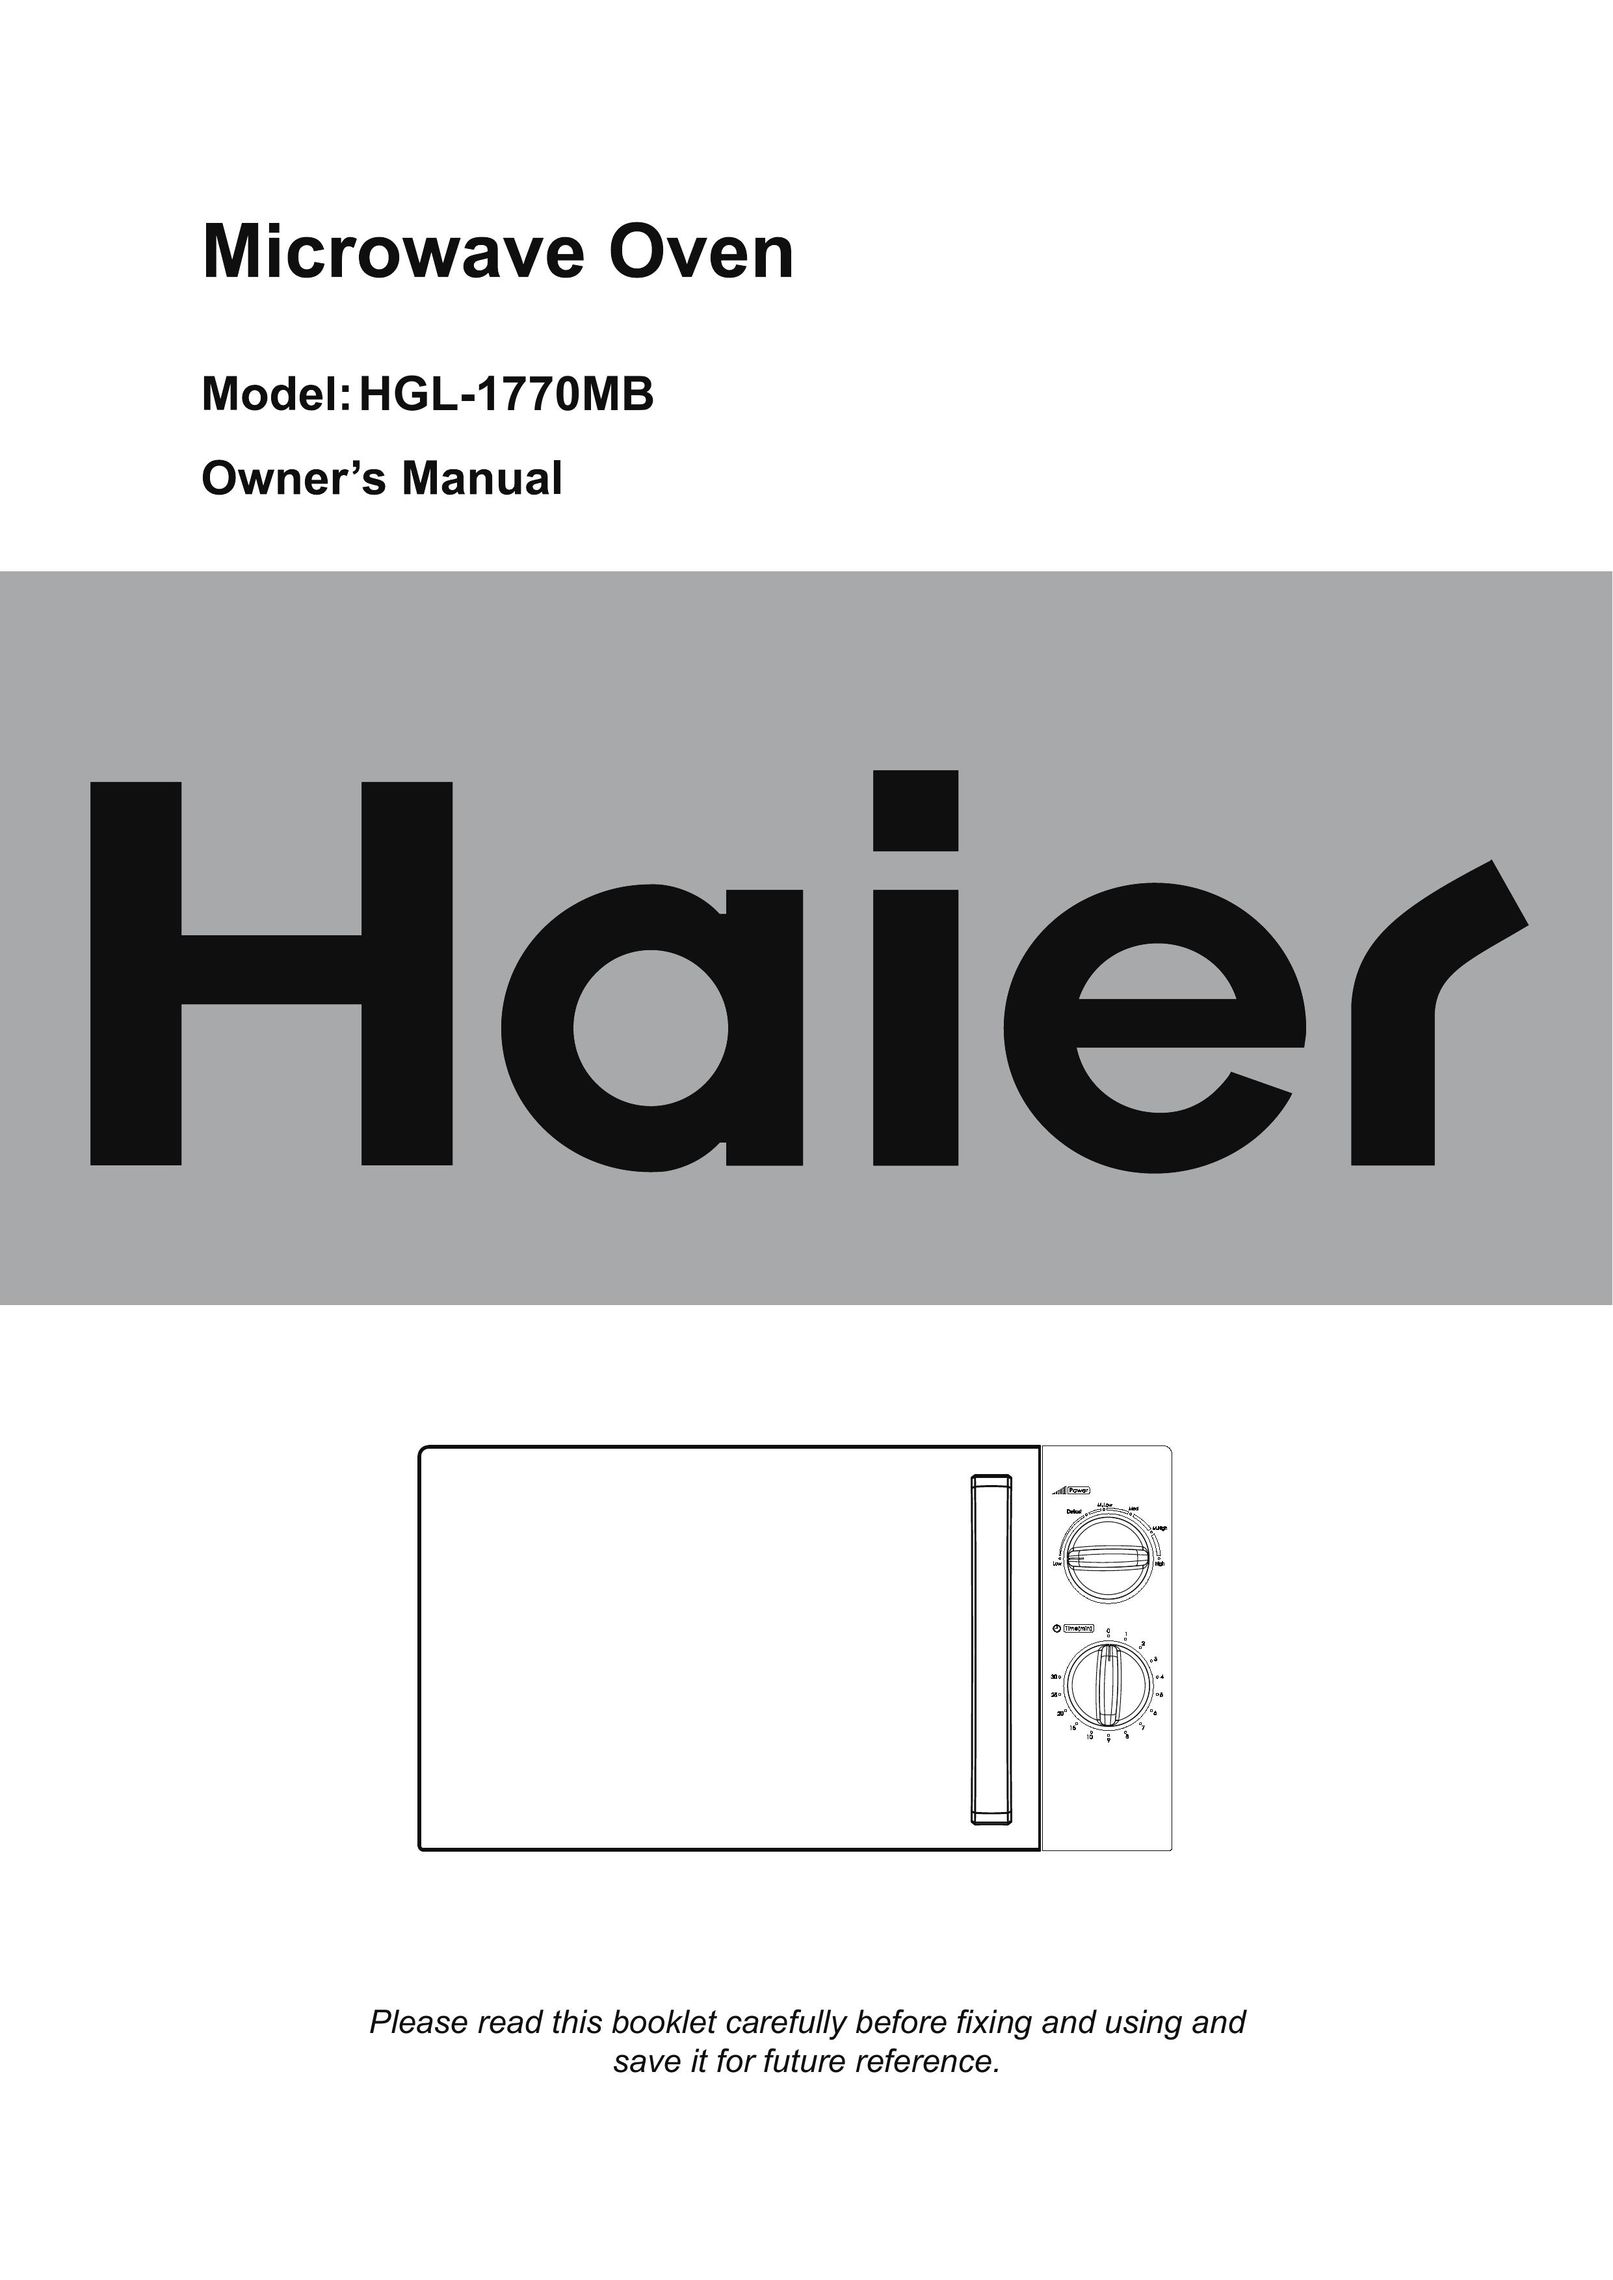 Haier HGL-1770MB Microwave Oven User Manual